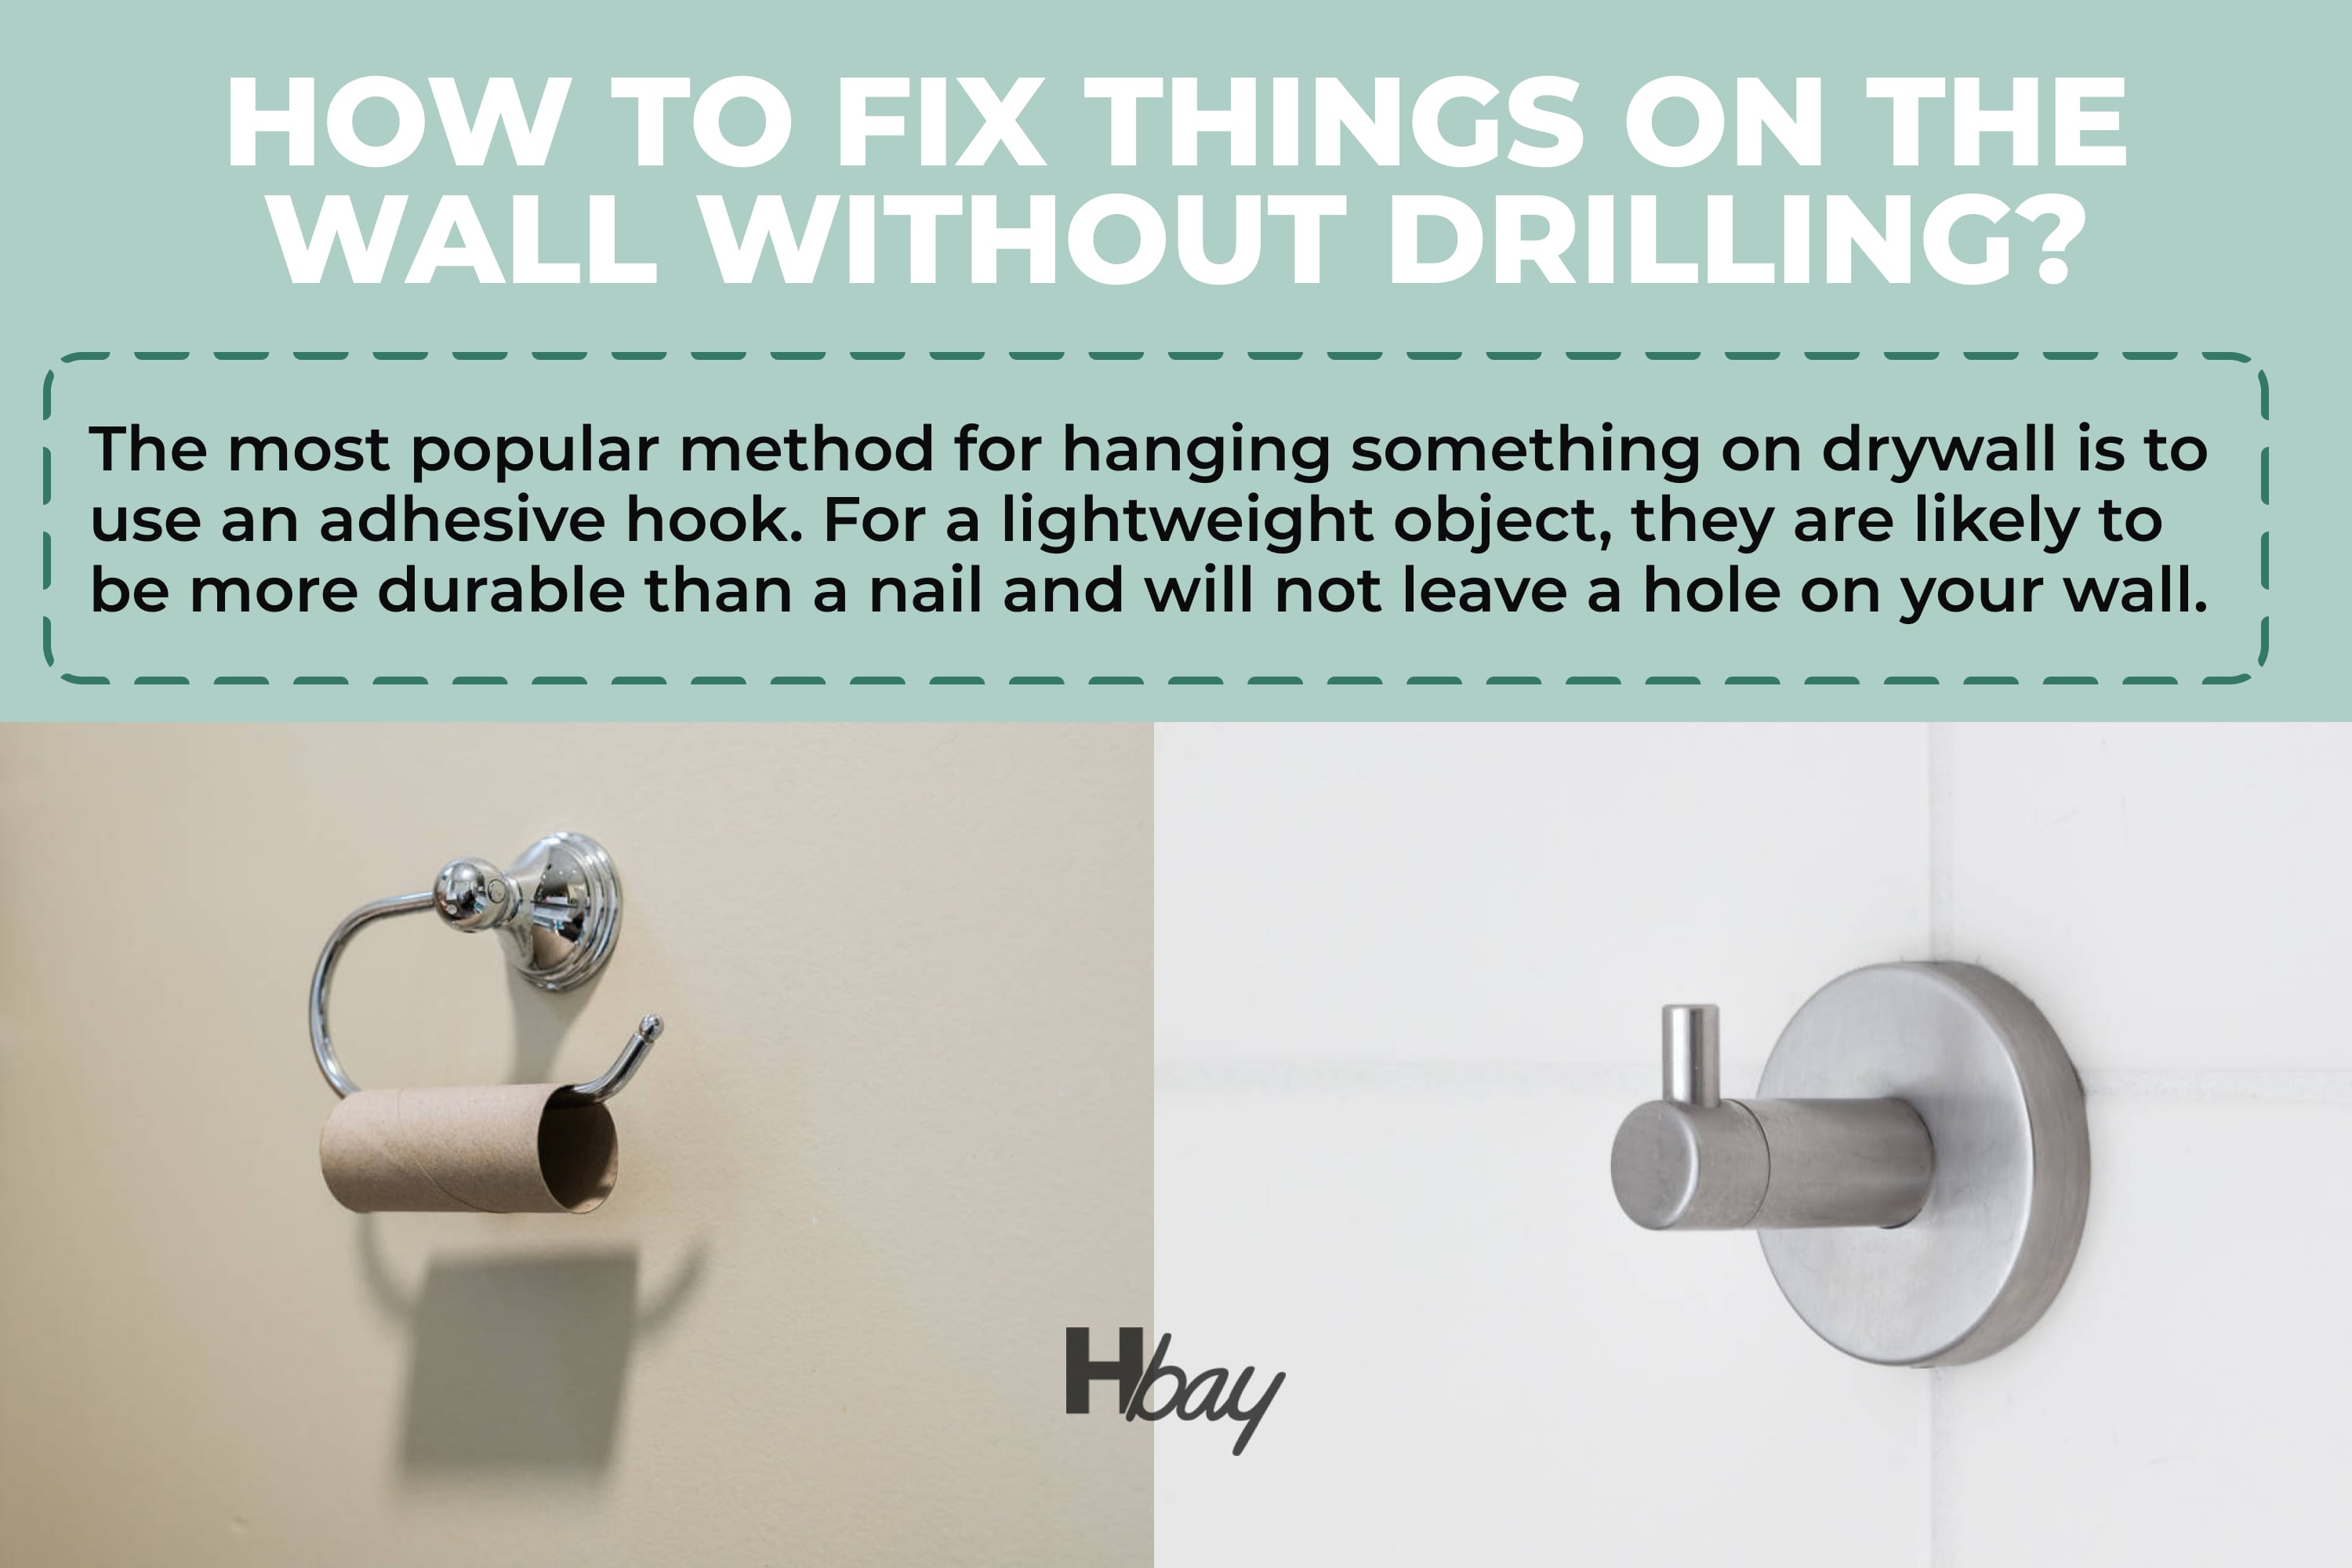 How to Secure Things on a Wall without Drilling